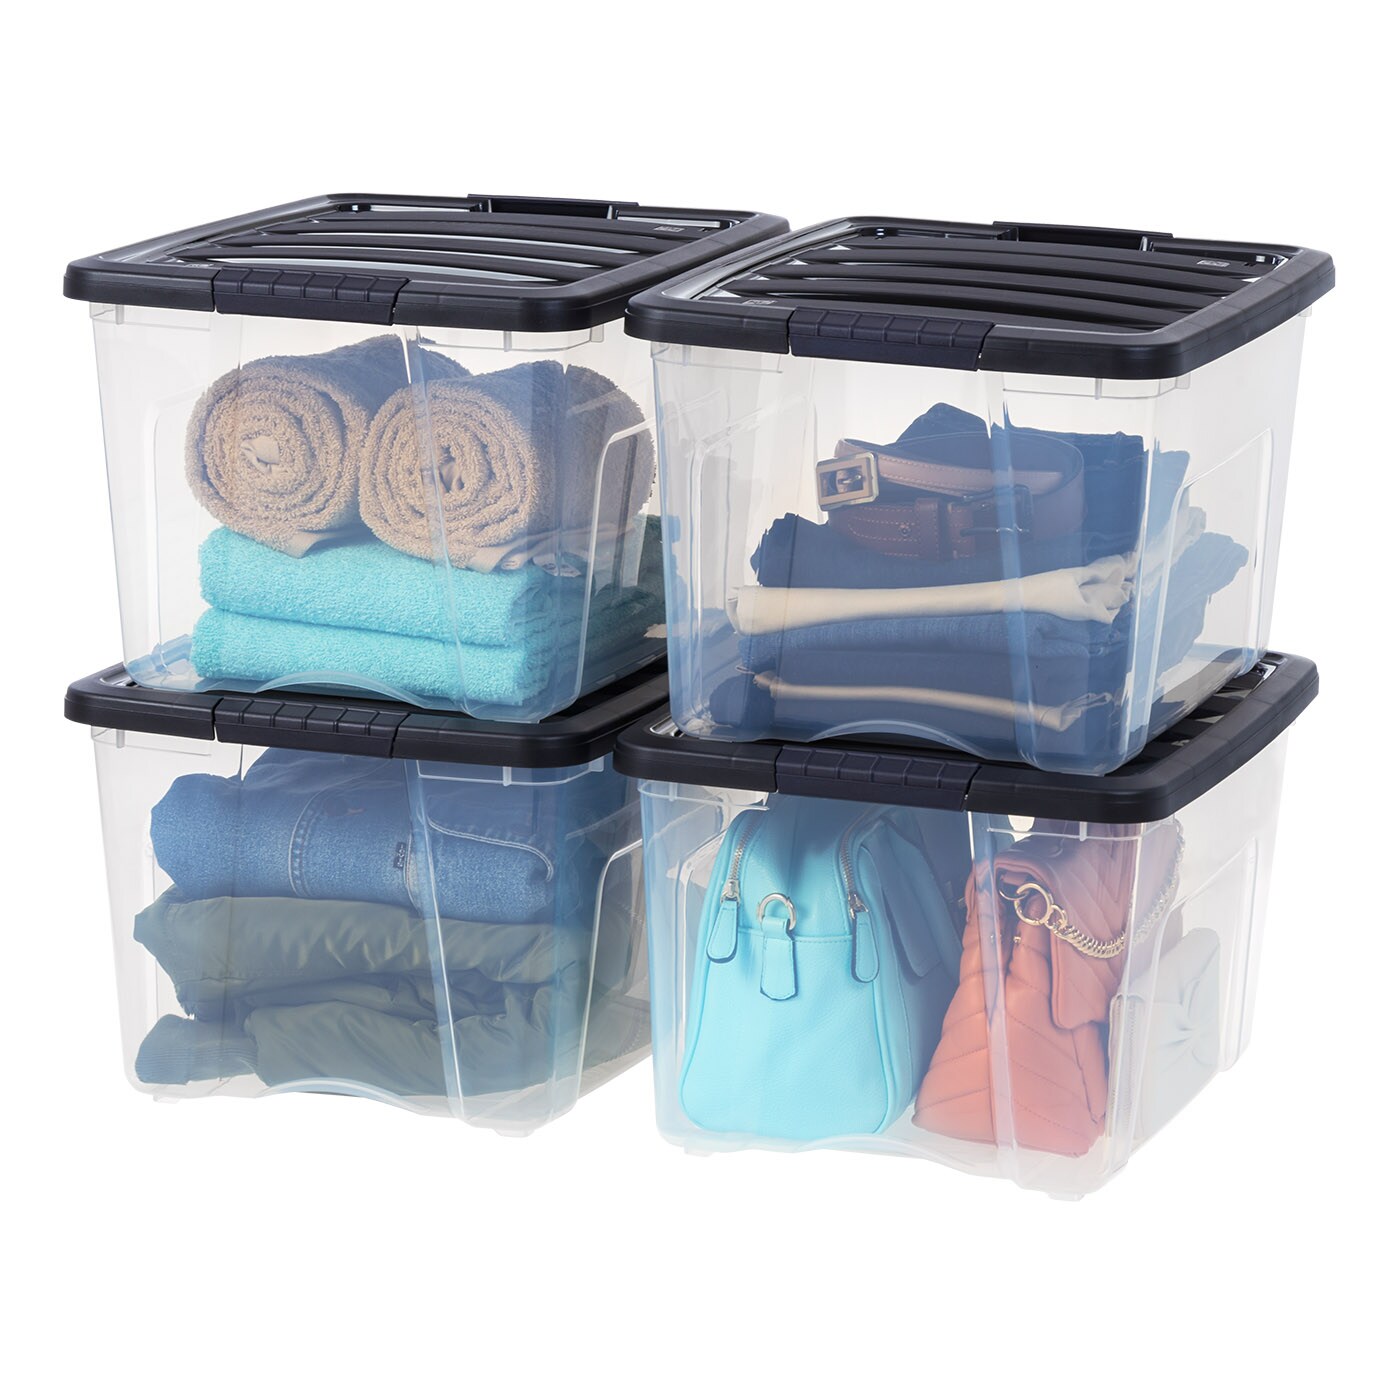 IRIS USA 40 Quart Stackable Plastic Storage Bins with Lids and